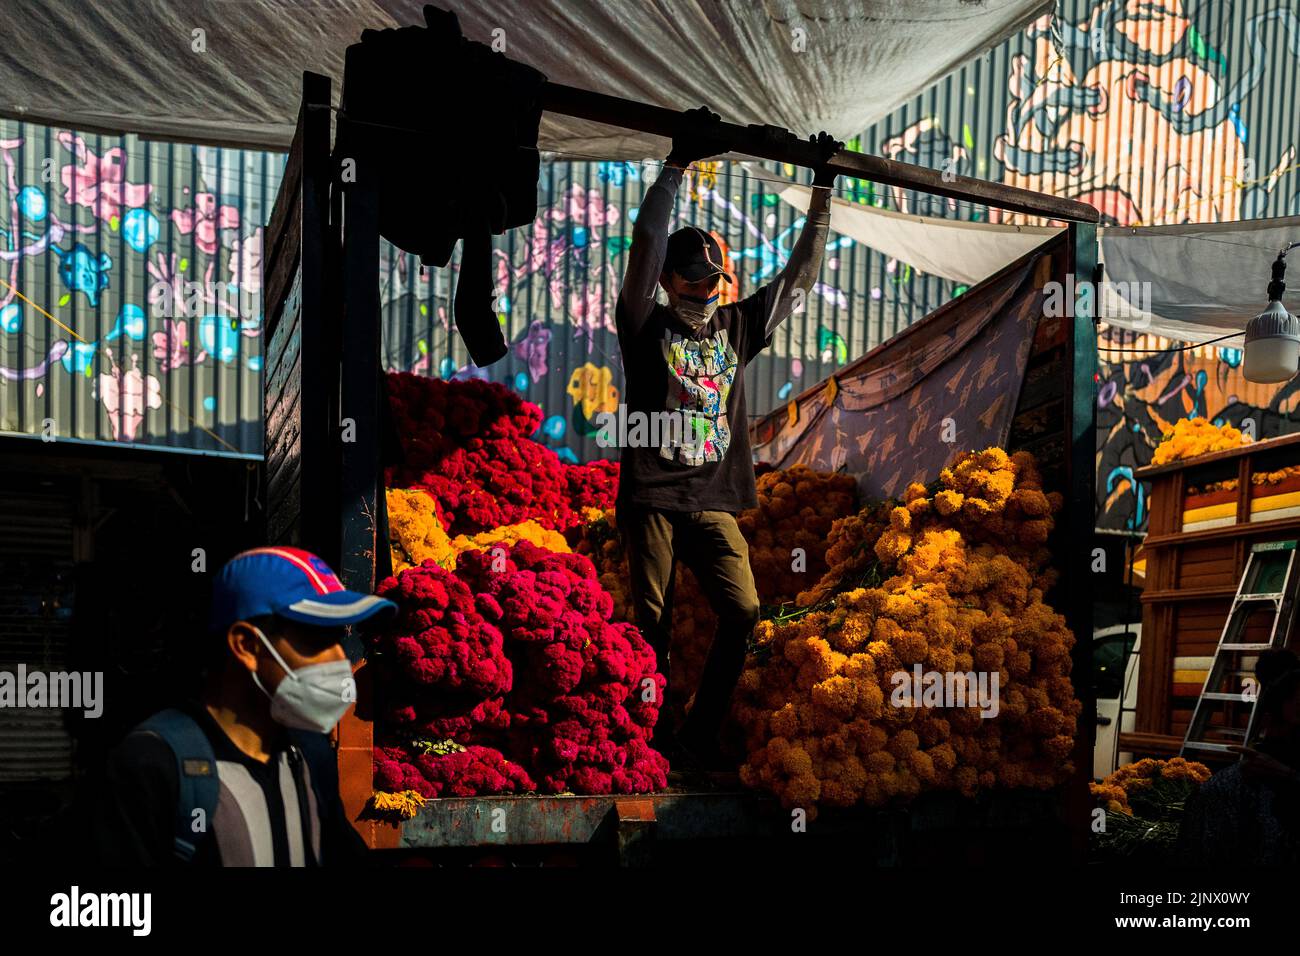 A Mexican farmer stands on the back of a truck selling bunches of marigold flowers for the Day of the Dead celebrations in Mexico City, Mexico. Stock Photo